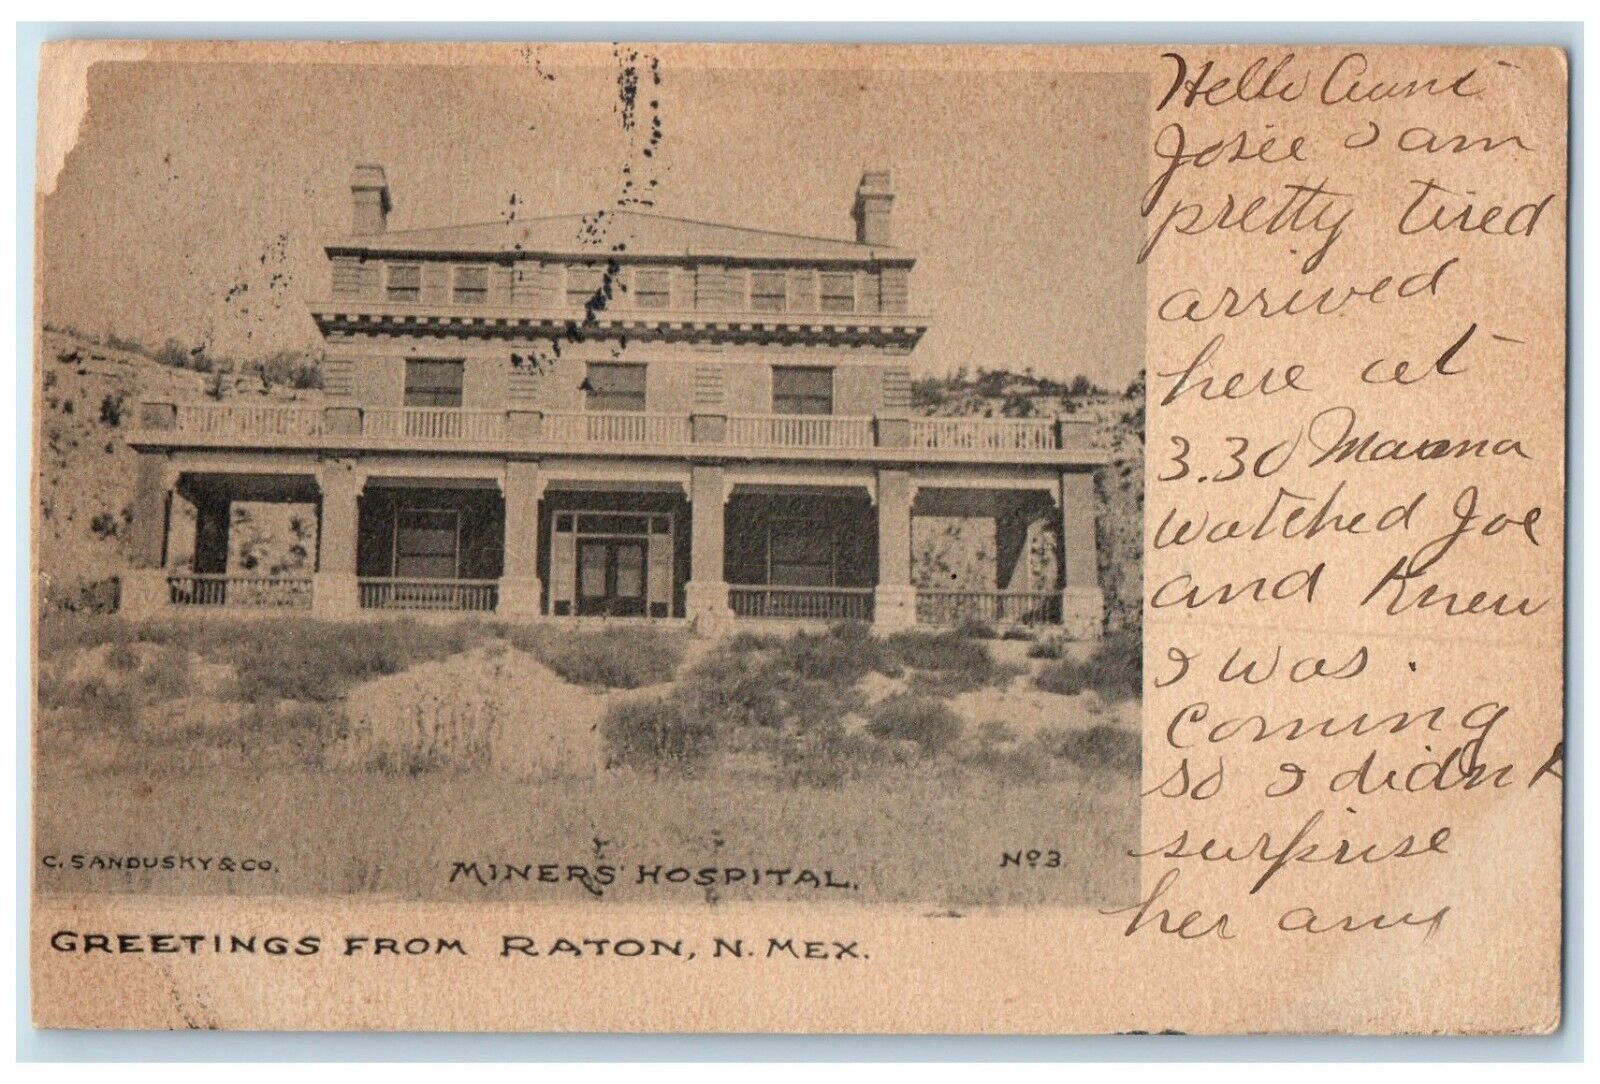 1907 Greetings From Raton New Mexico NM Miners Hospital Building Posted Postcard